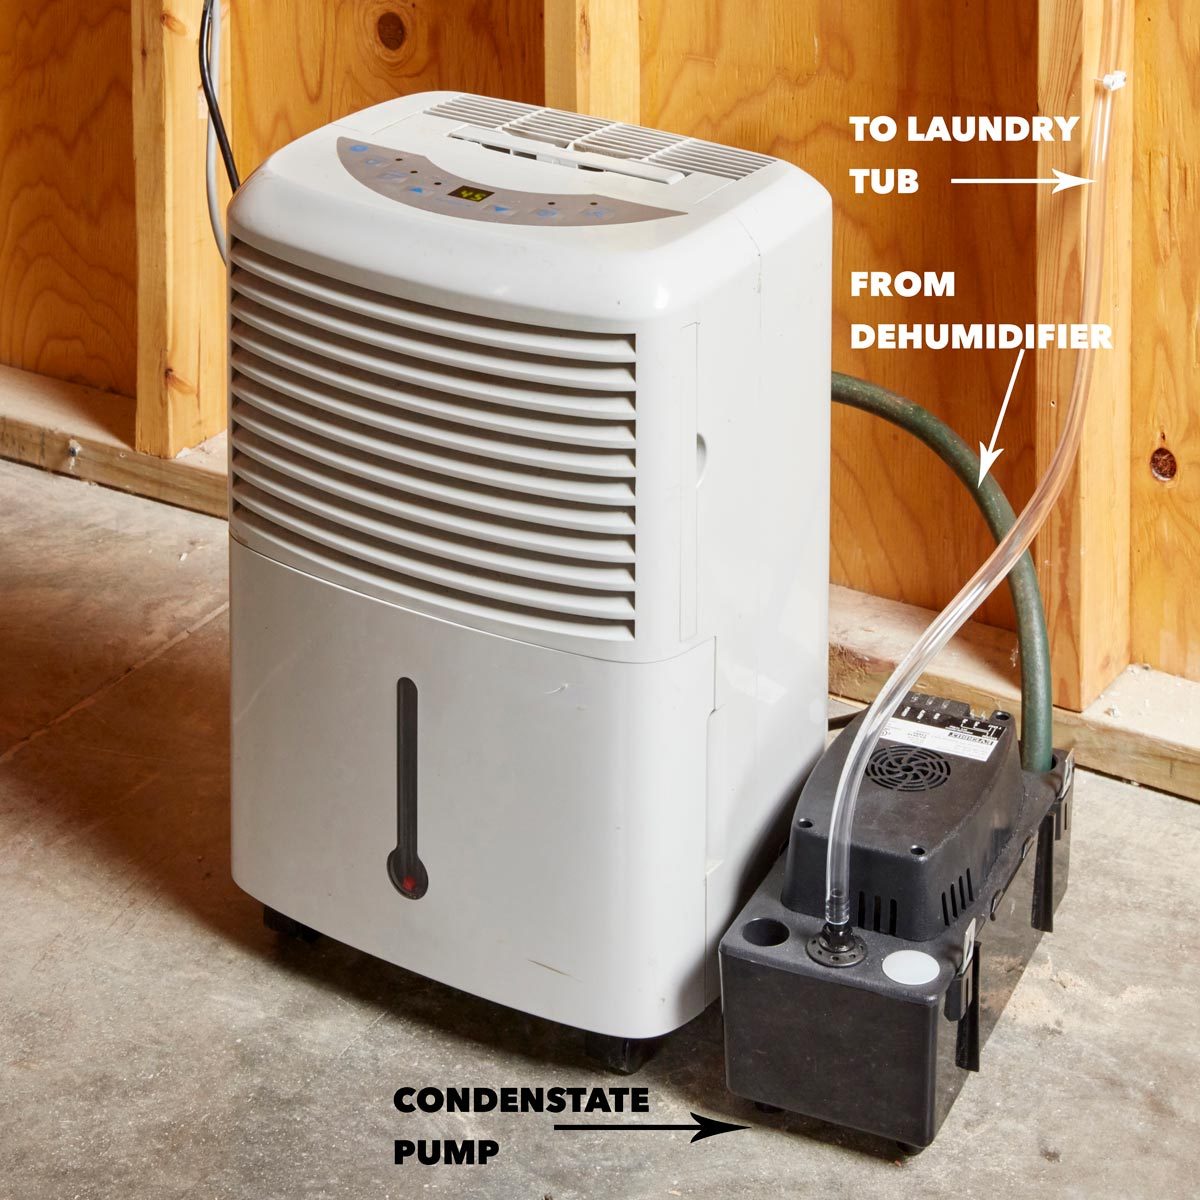 Save Time and Money With This Self-Draining DIY Dehumidifier